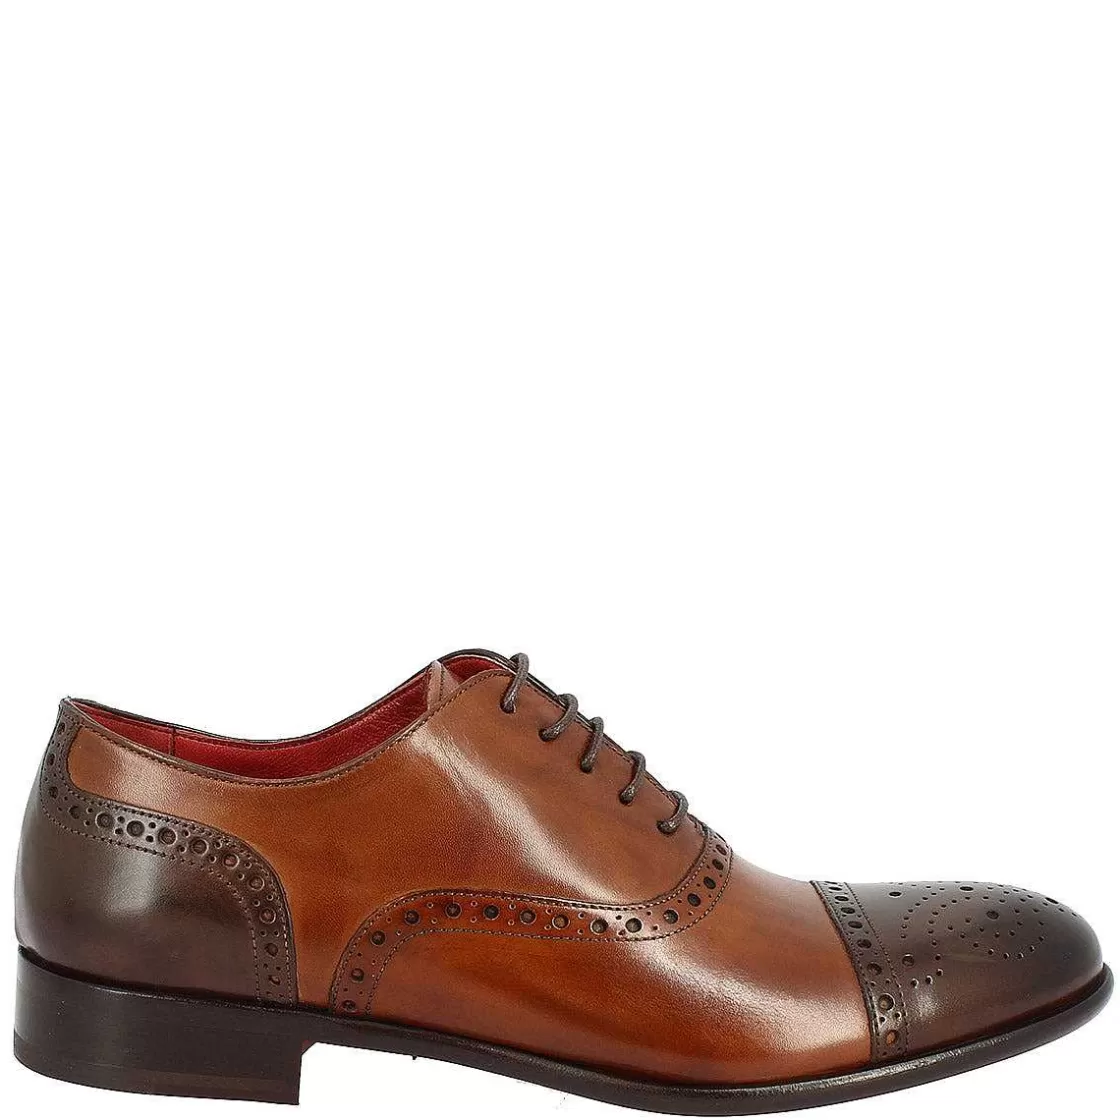 Leonardo Men'S Lace-Up Brogues Shoes Handmade In Brandy And Dark Brown Montecarlo Leather Cheap